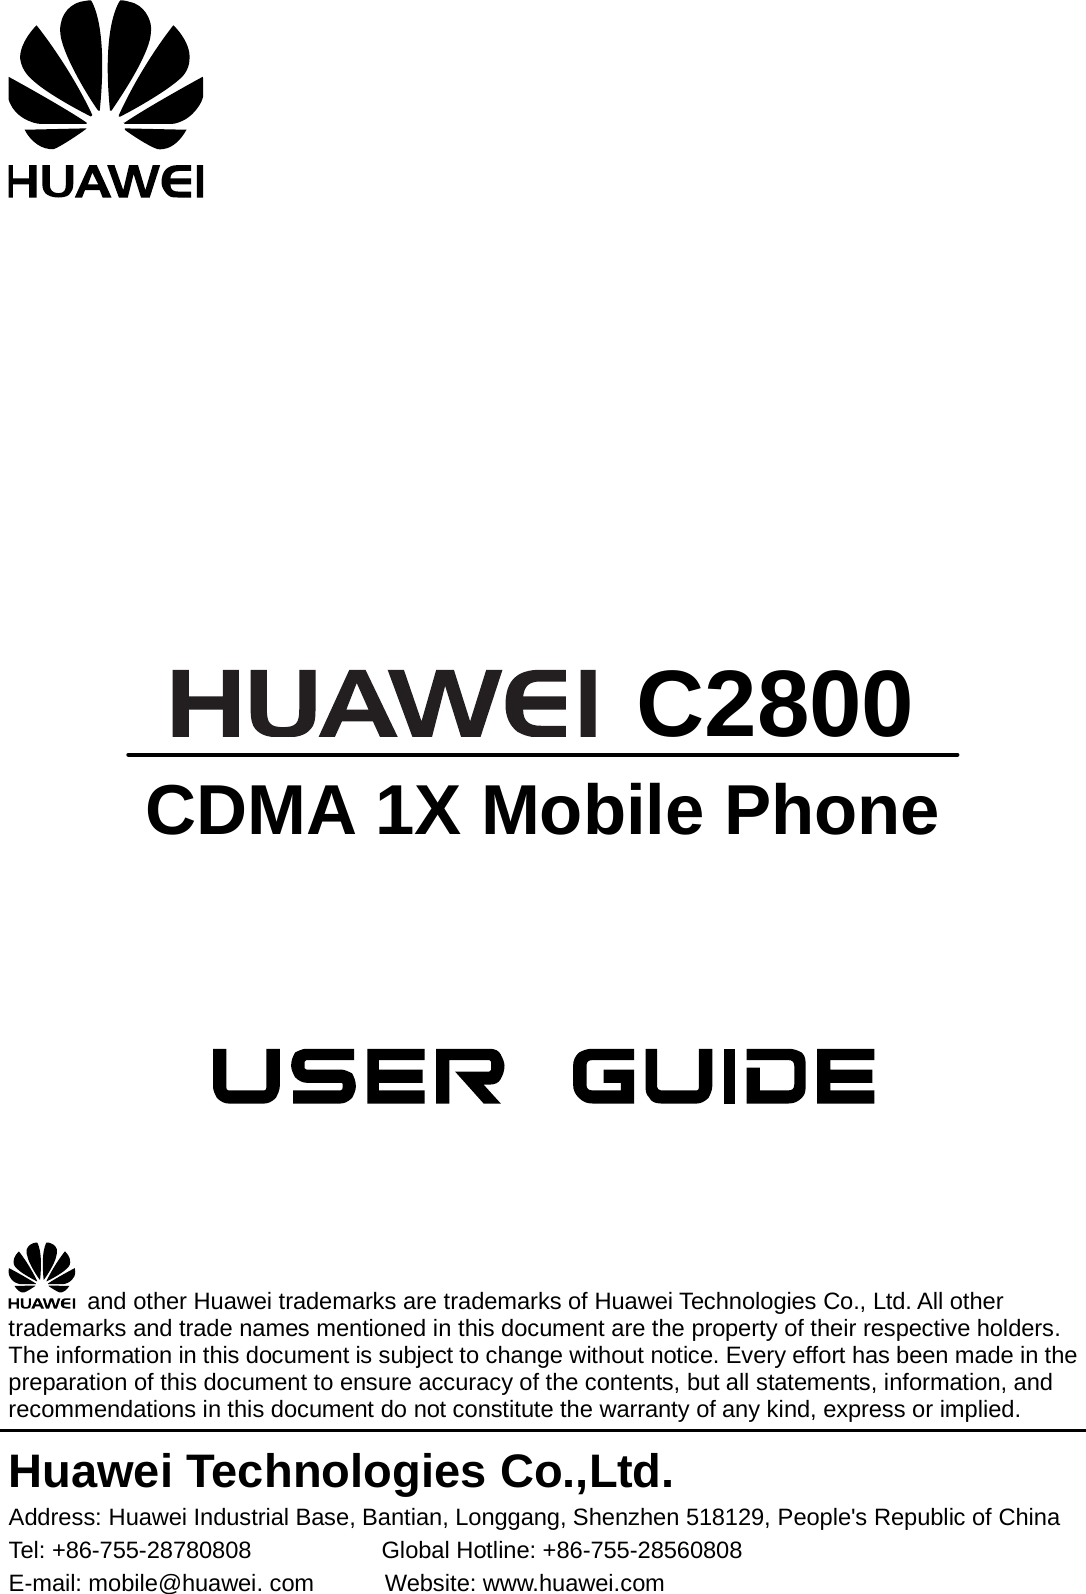          C2800 CDMA 1X Mobile Phone         and other Huawei trademarks are trademarks of Huawei Technologies Co., Ltd. All other trademarks and trade names mentioned in this document are the property of their respective holders. The information in this document is subject to change without notice. Every effort has been made in the preparation of this document to ensure accuracy of the contents, but all statements, information, and recommendations in this document do not constitute the warranty of any kind, express or implied. Huawei Technologies Co.,Ltd. Address: Huawei Industrial Base, Bantian, Longgang, Shenzhen 518129, People&apos;s Republic of China Tel: +86-755-28780808           Global Hotline: +86-755-28560808 E-mail: mobile@huawei. com      Website: www.huawei.com 